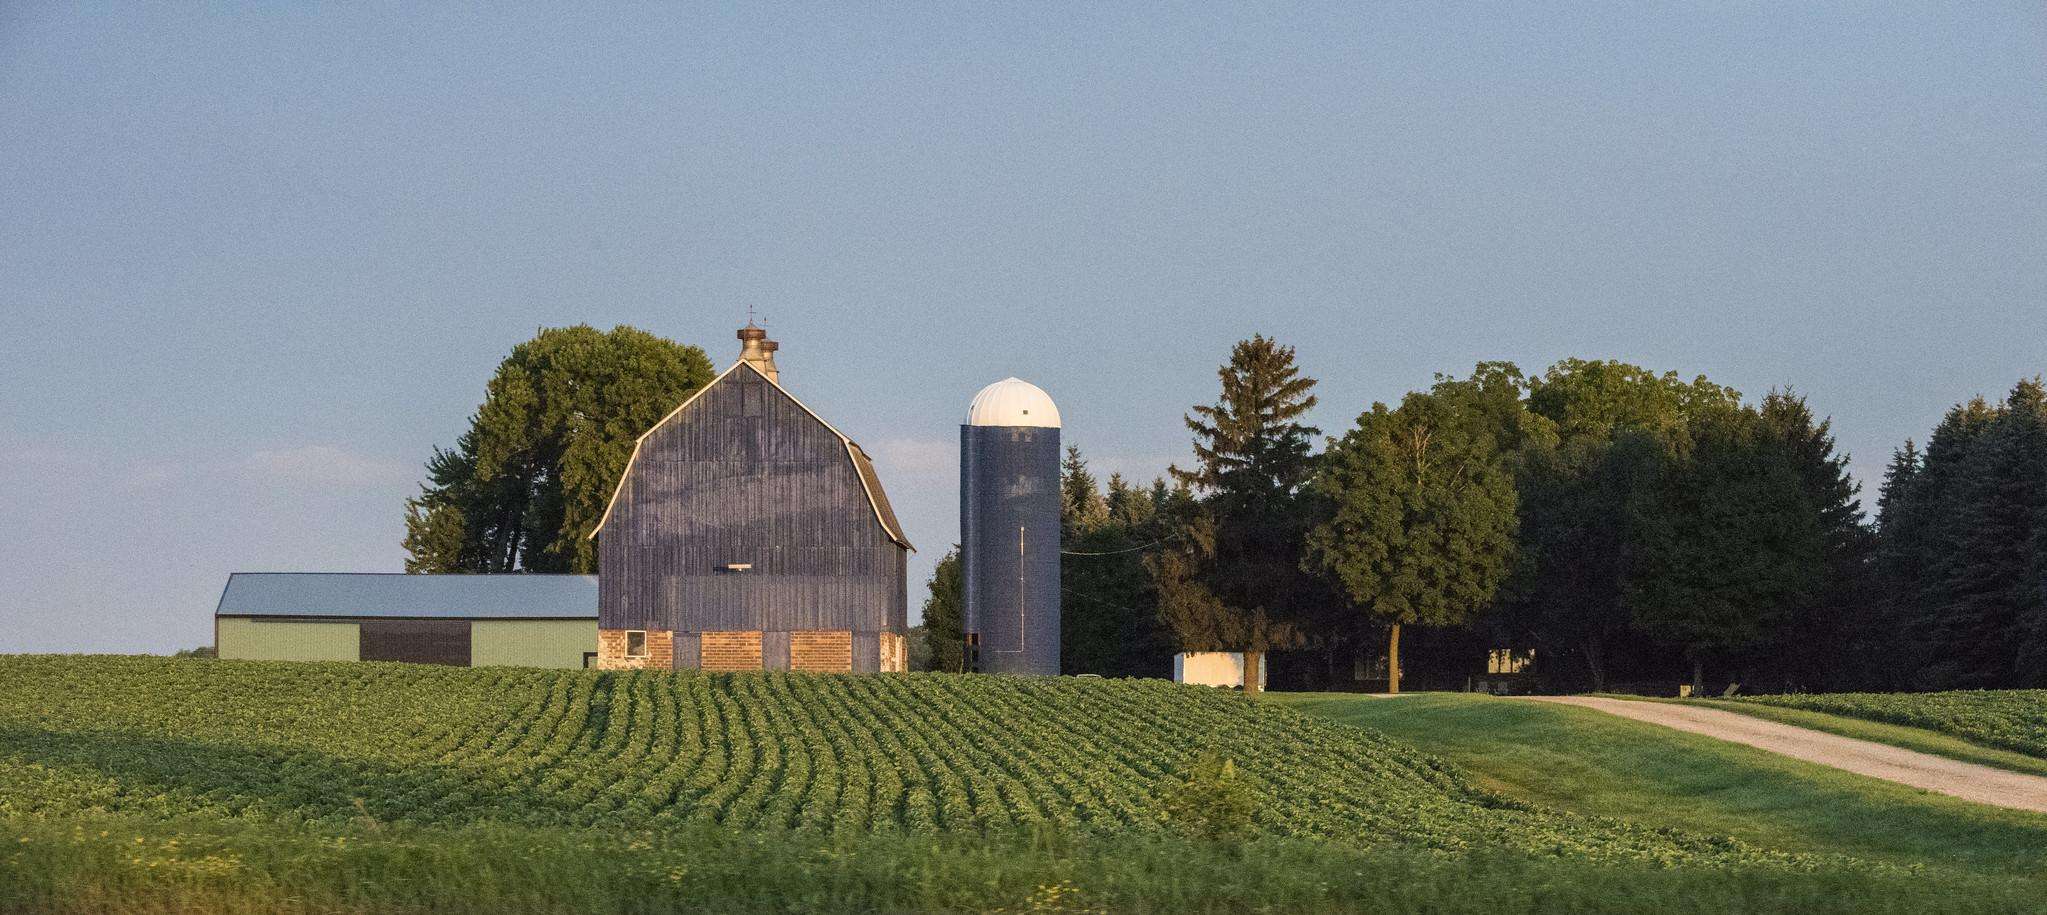 Scenic shot of a barn with fields in front.